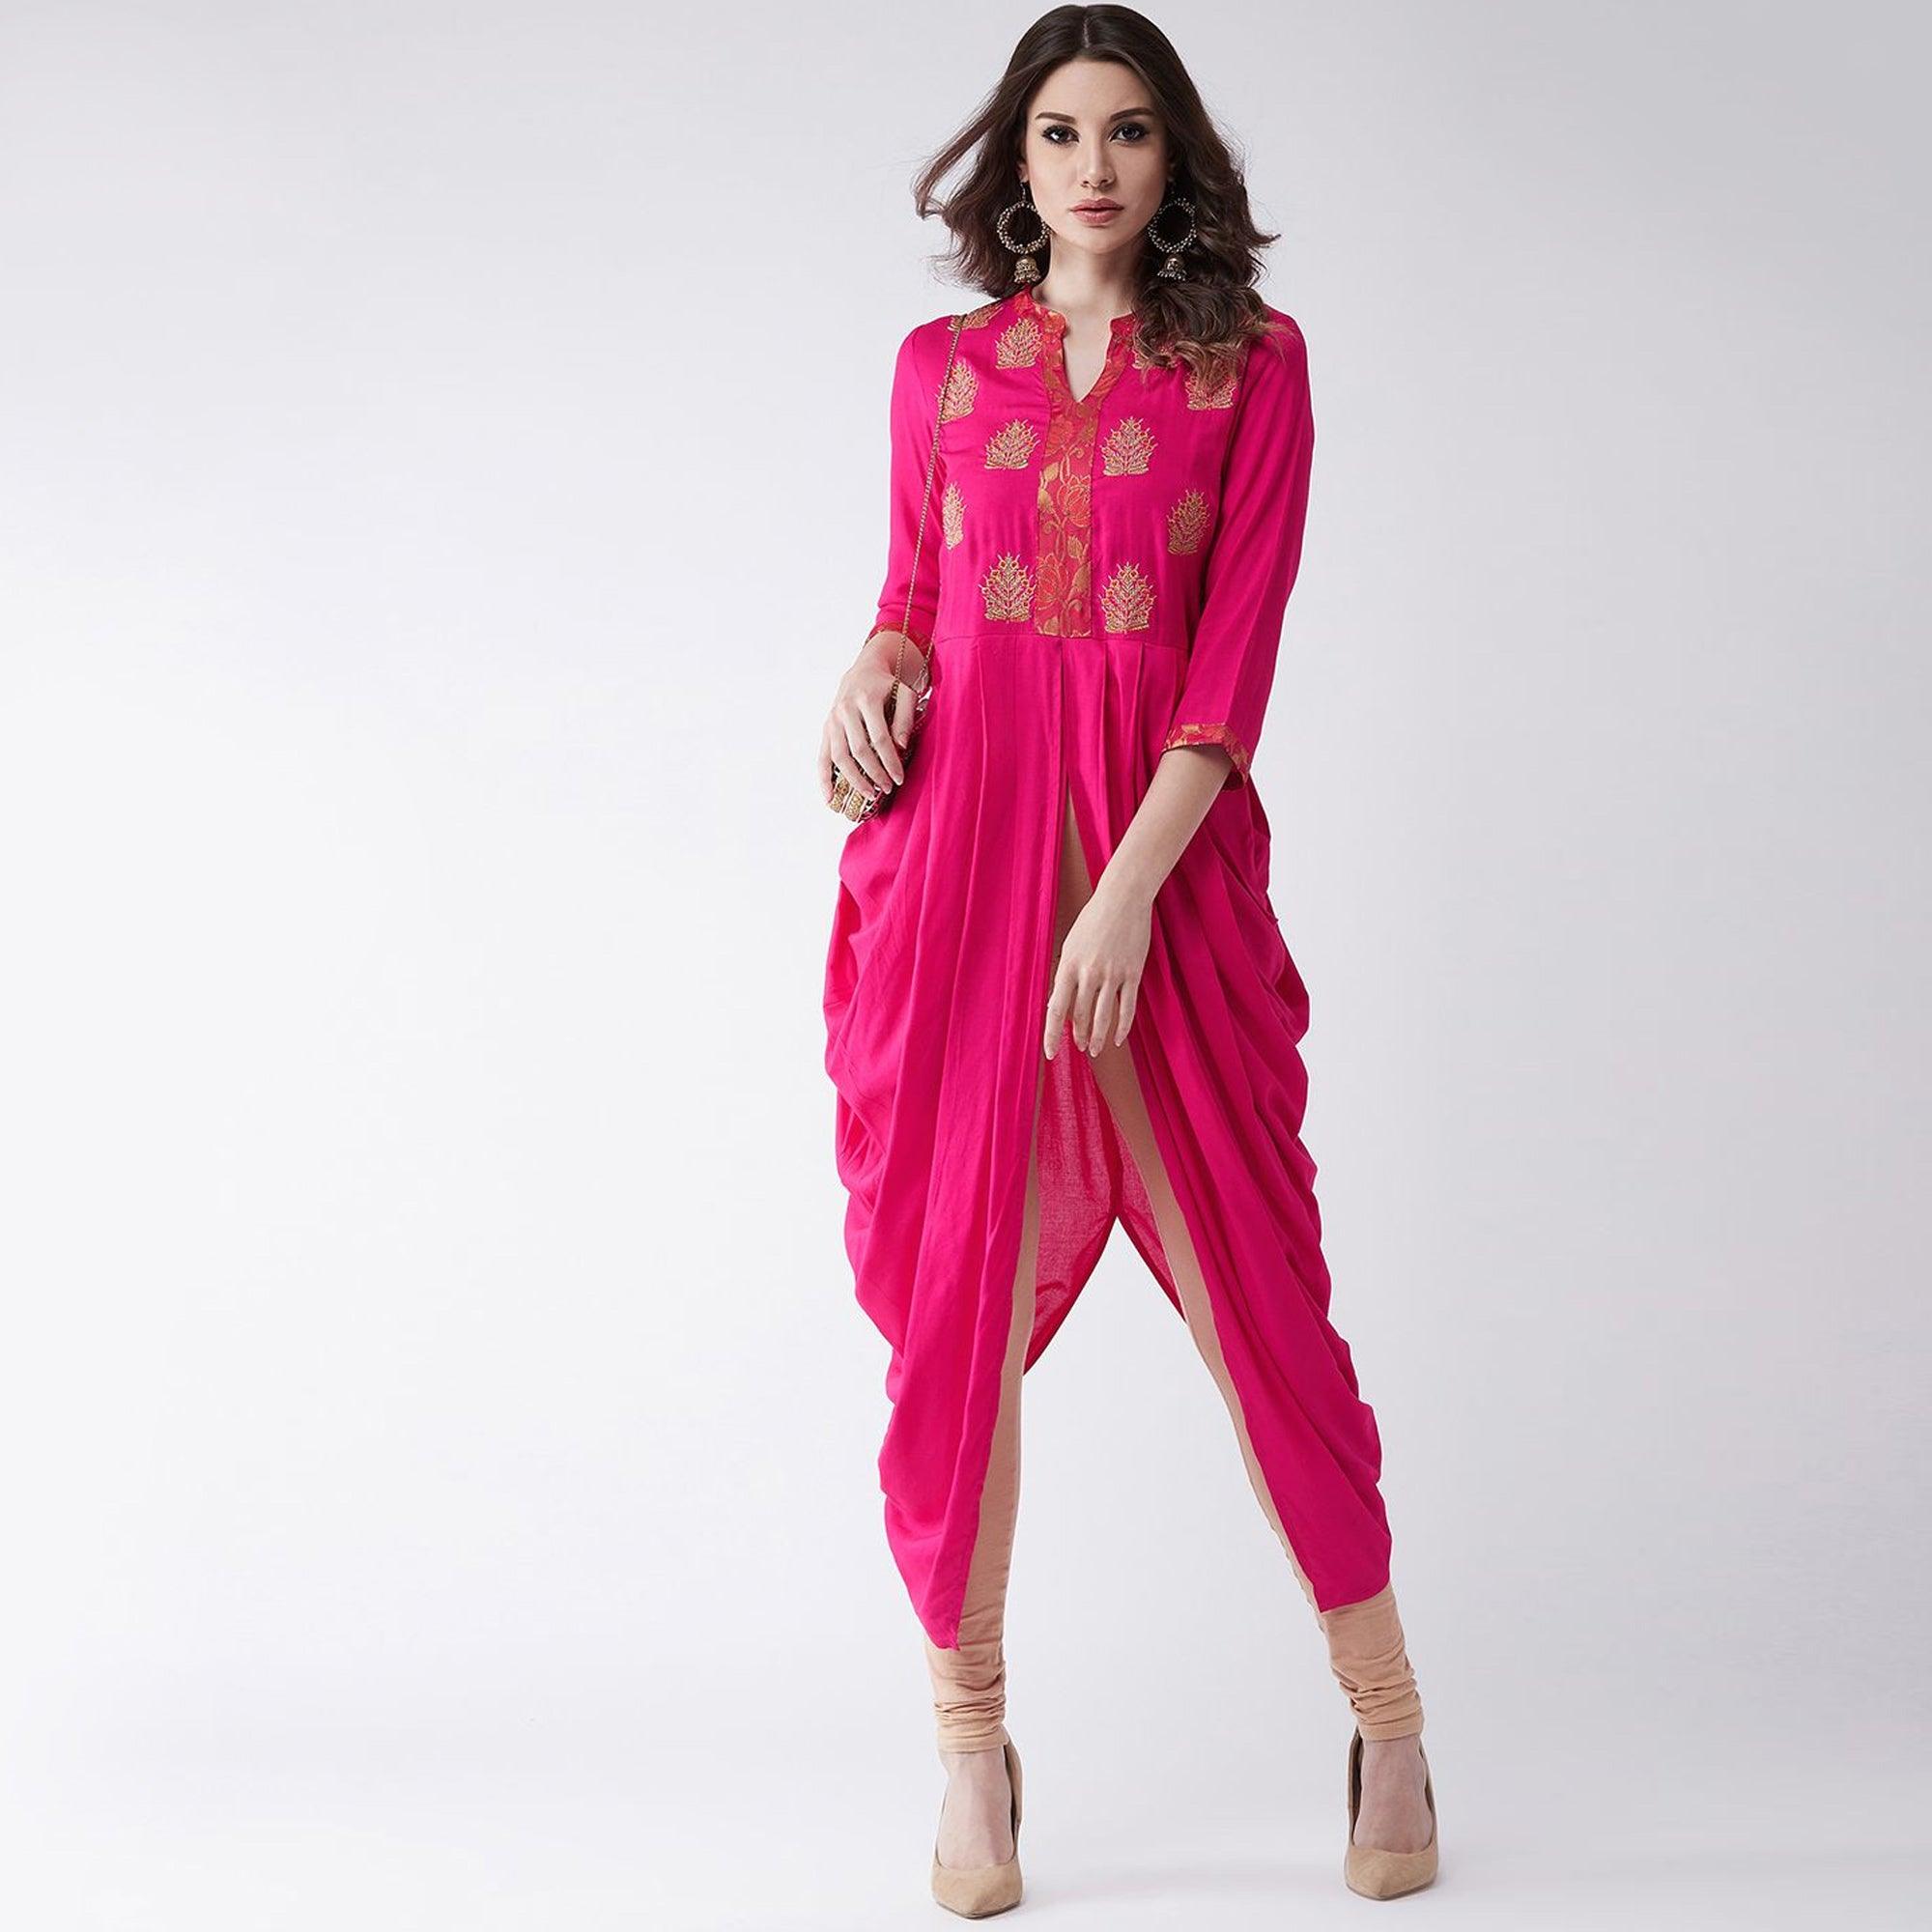 Pannkh - Women's Pink Colored Embroidered Rayon Cowl Kurti - Peachmode